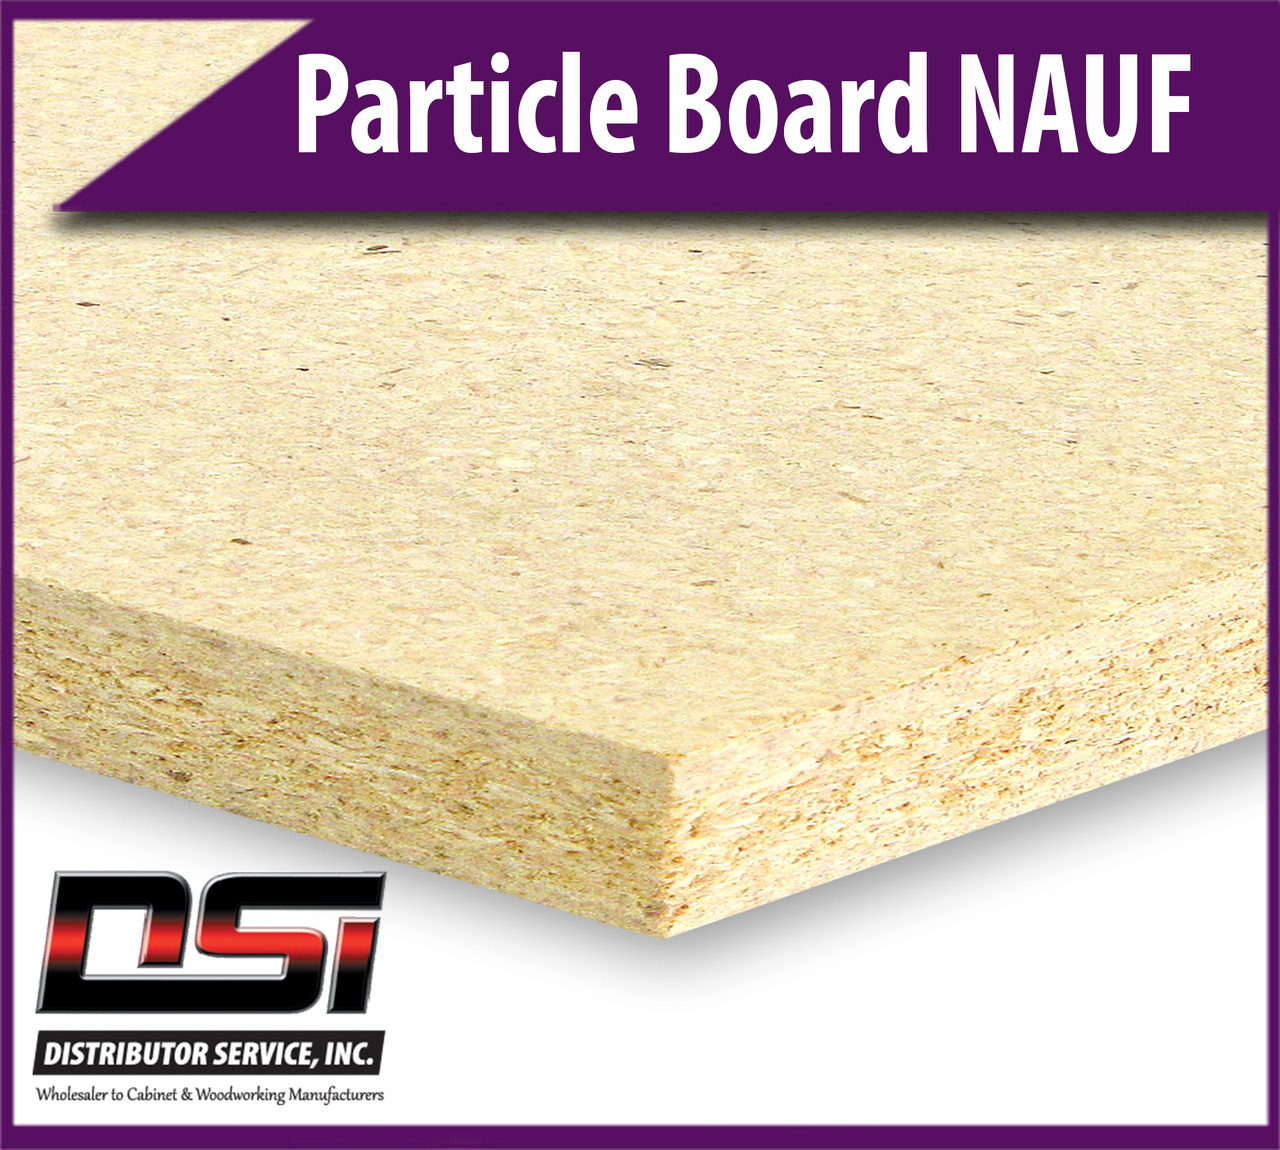 Particle Board Core NAUF 11/16" x 61" x 97" Industrial Particleboard Panels